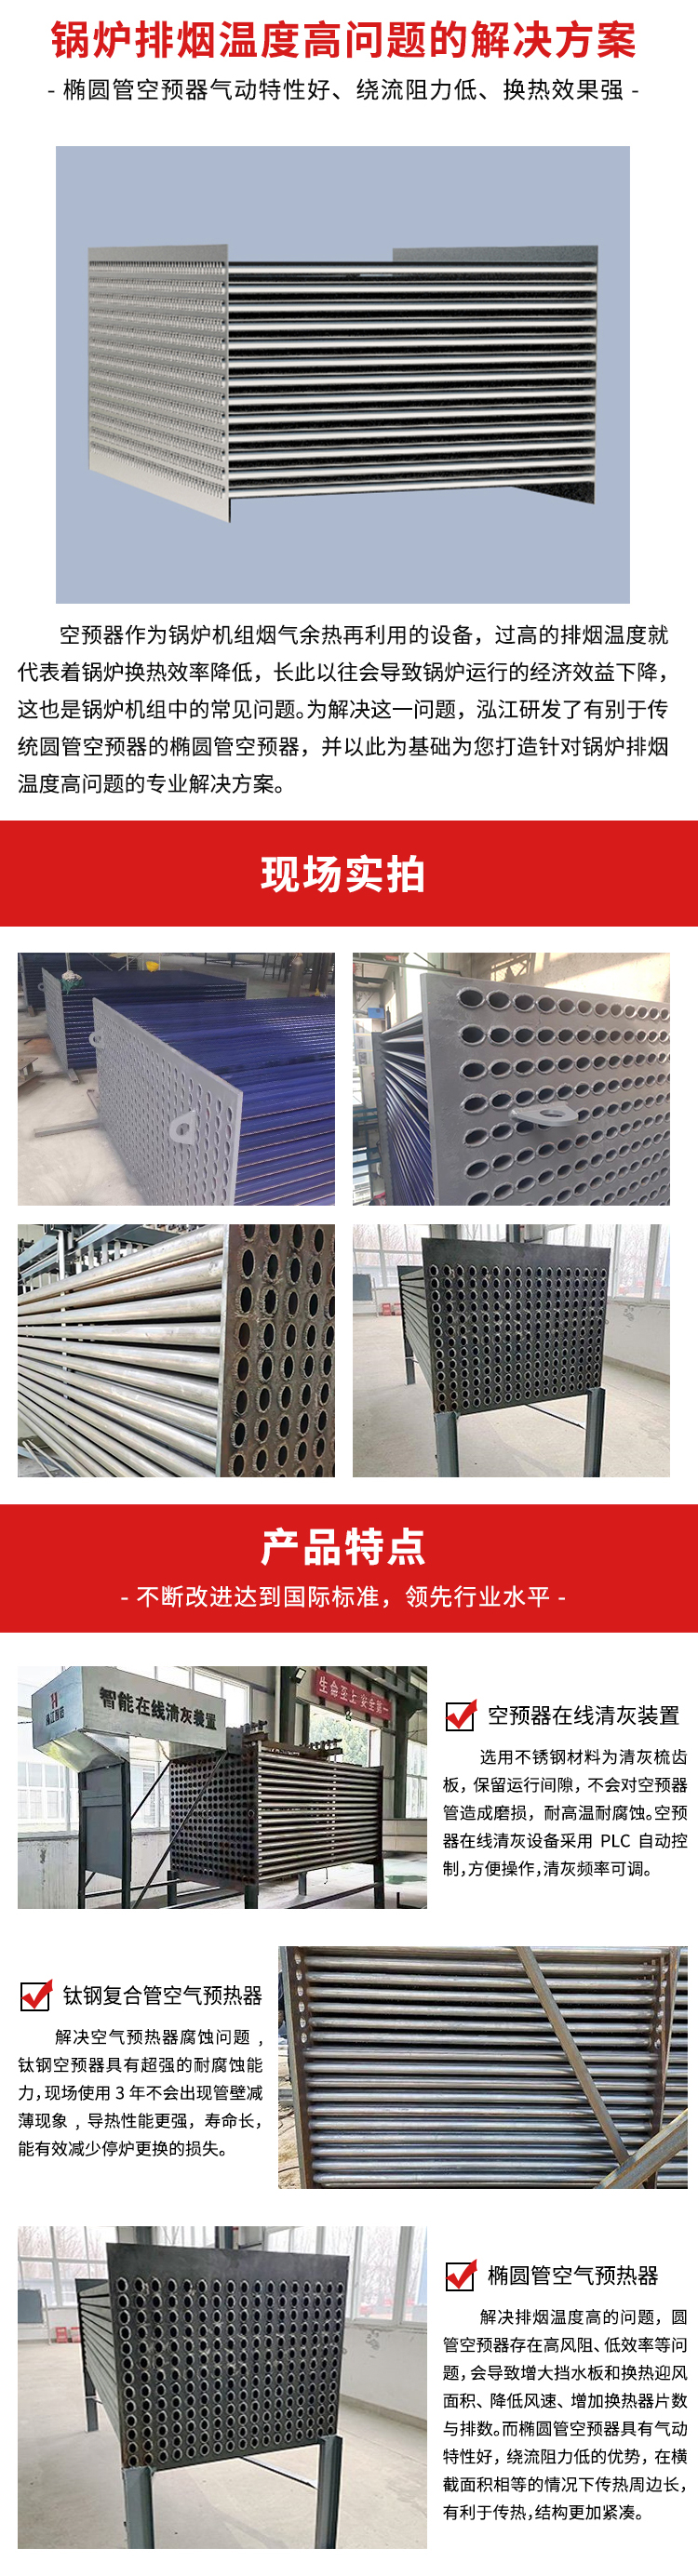 Corrosion Prevention of Cold End of Boiler Air Preheater in Thermal Power Plant Composite Pipe Air Preheater